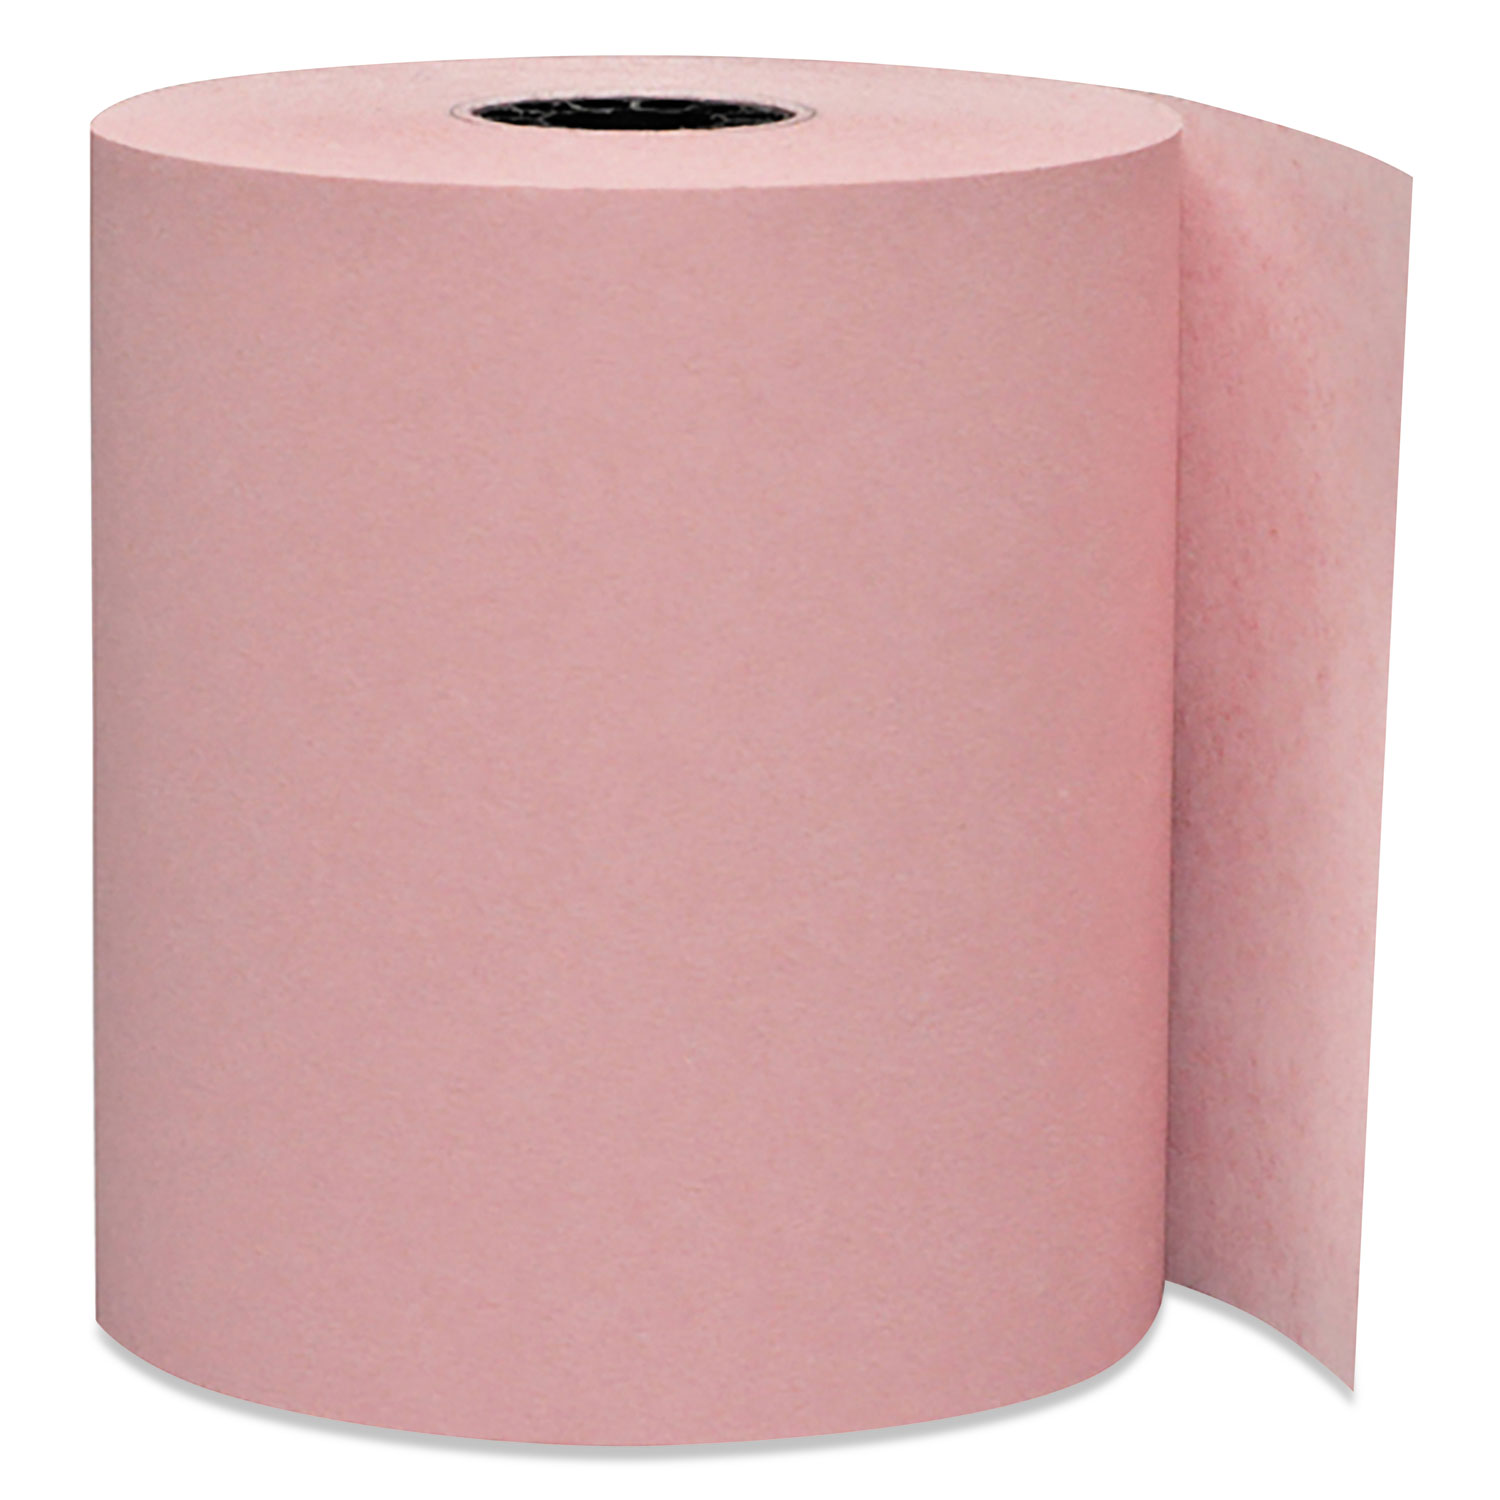  Iconex PMC05214P Direct Thermal Printing Paper Rolls, 0.45 Core, 3.13 x 230 ft, Pink, 50/Carton (ICX90902269) 